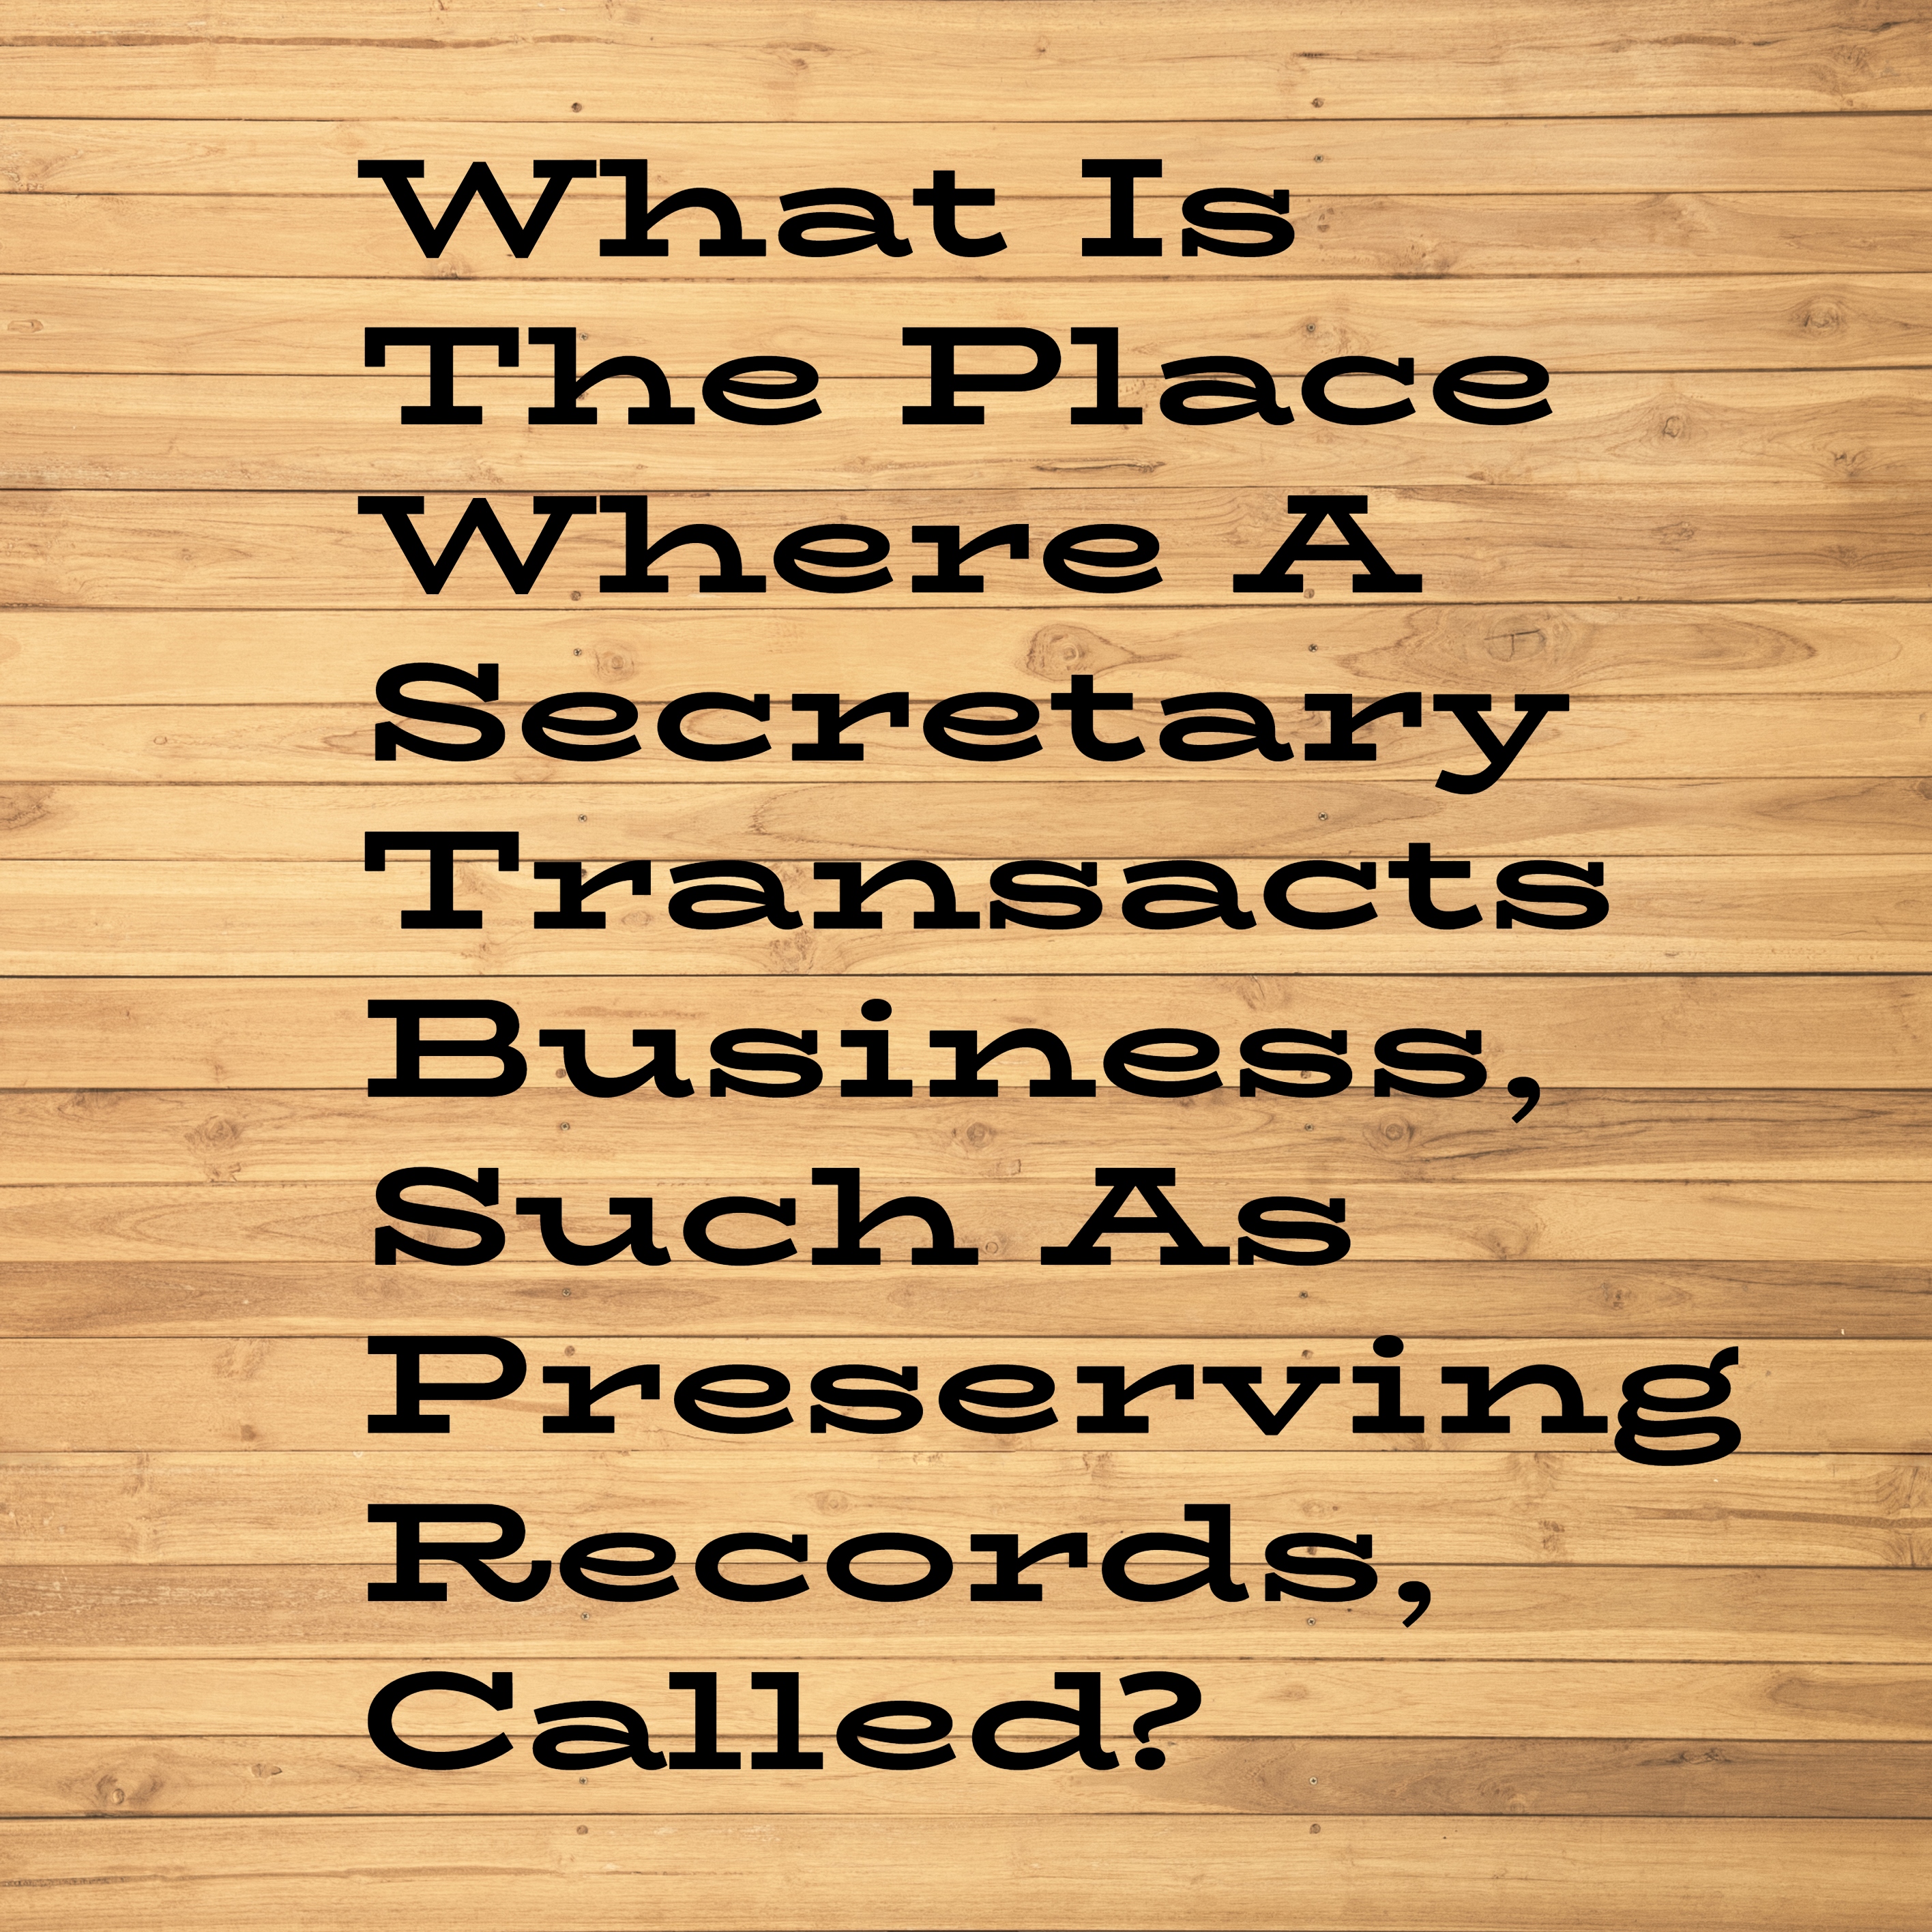 What Is The Place Where A Secretary Transacts Business, Such As Preserving Records, Called?